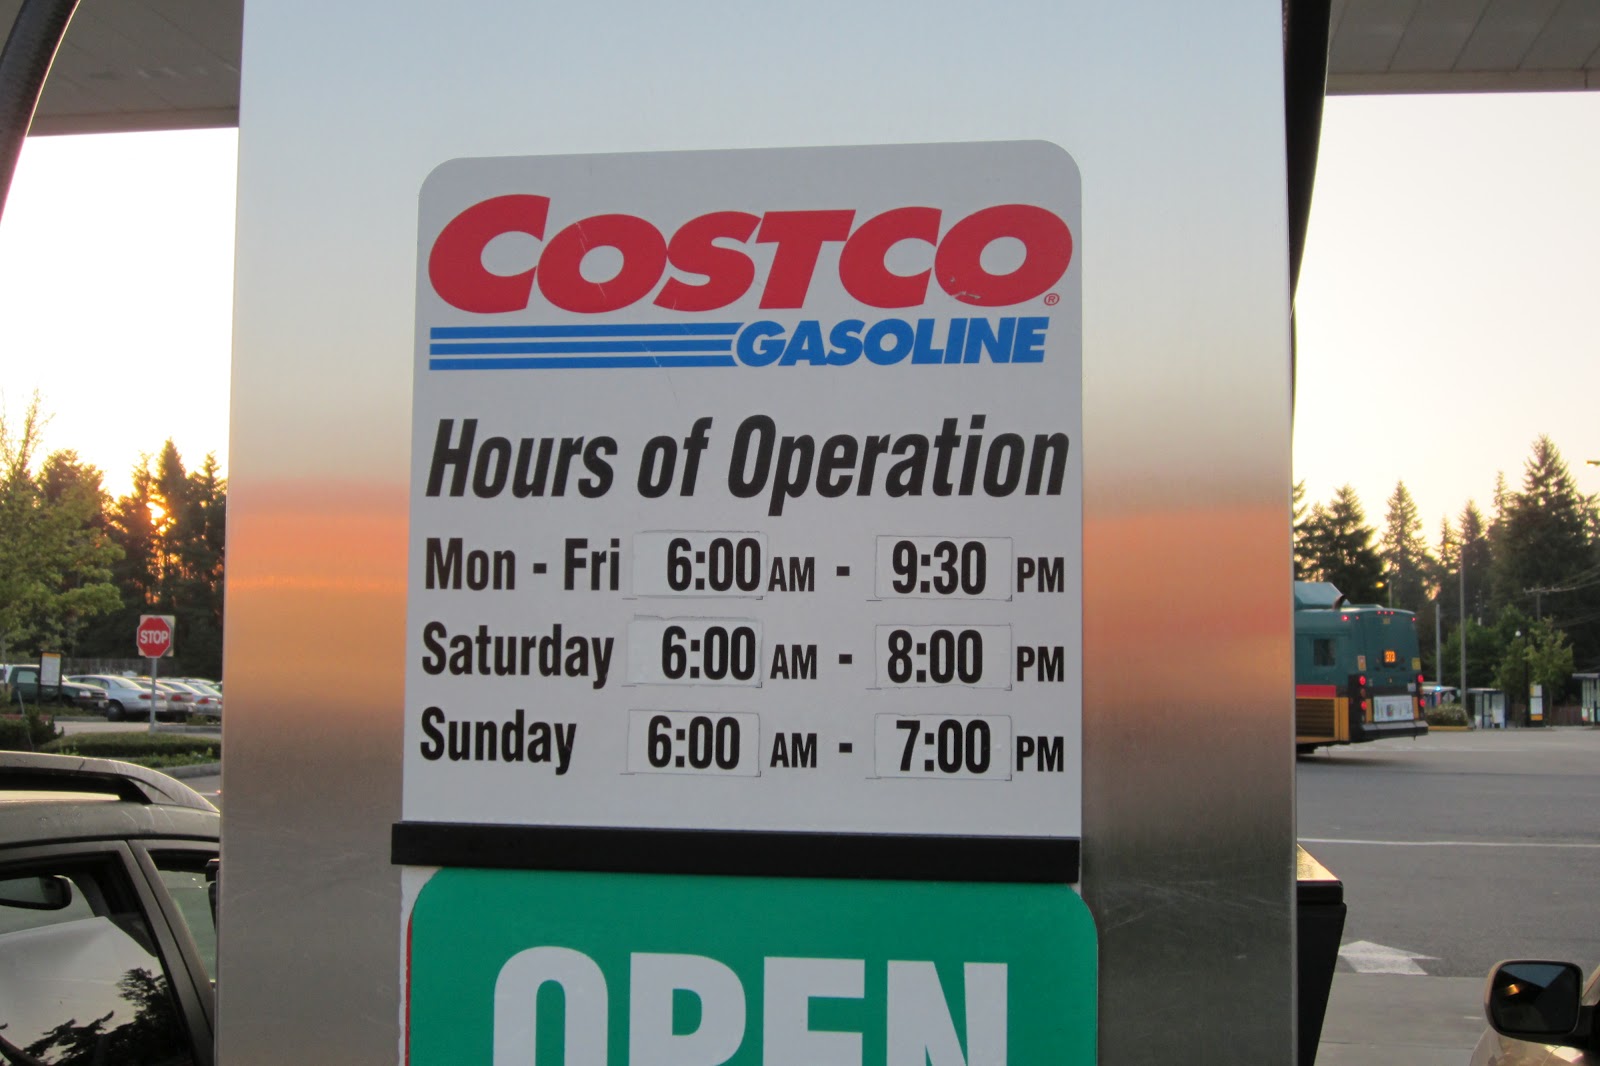 what-credit-cards-can-i-use-at-costco-gas-station-lifescienceglobal